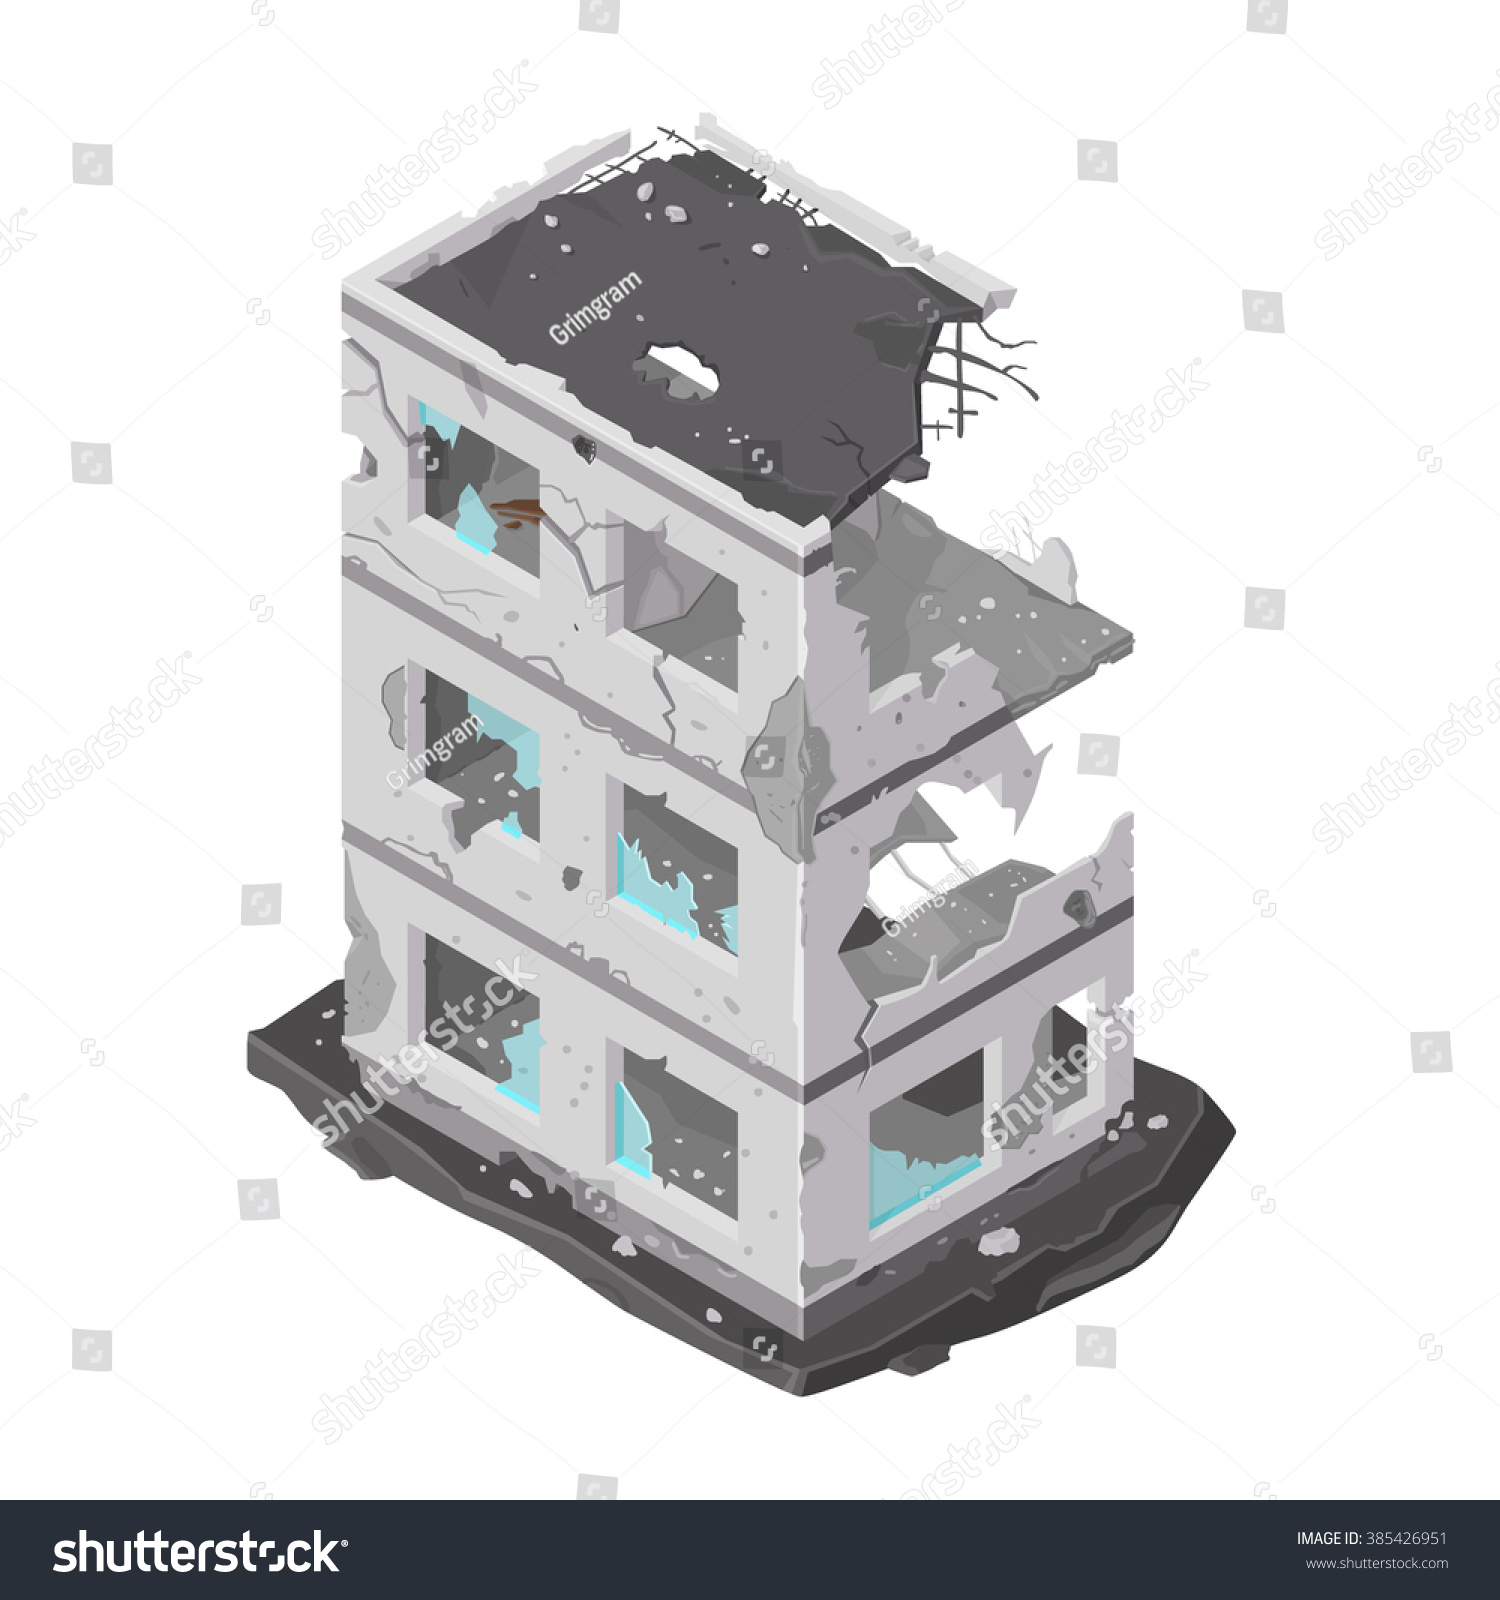 destroyed house clipart - photo #10